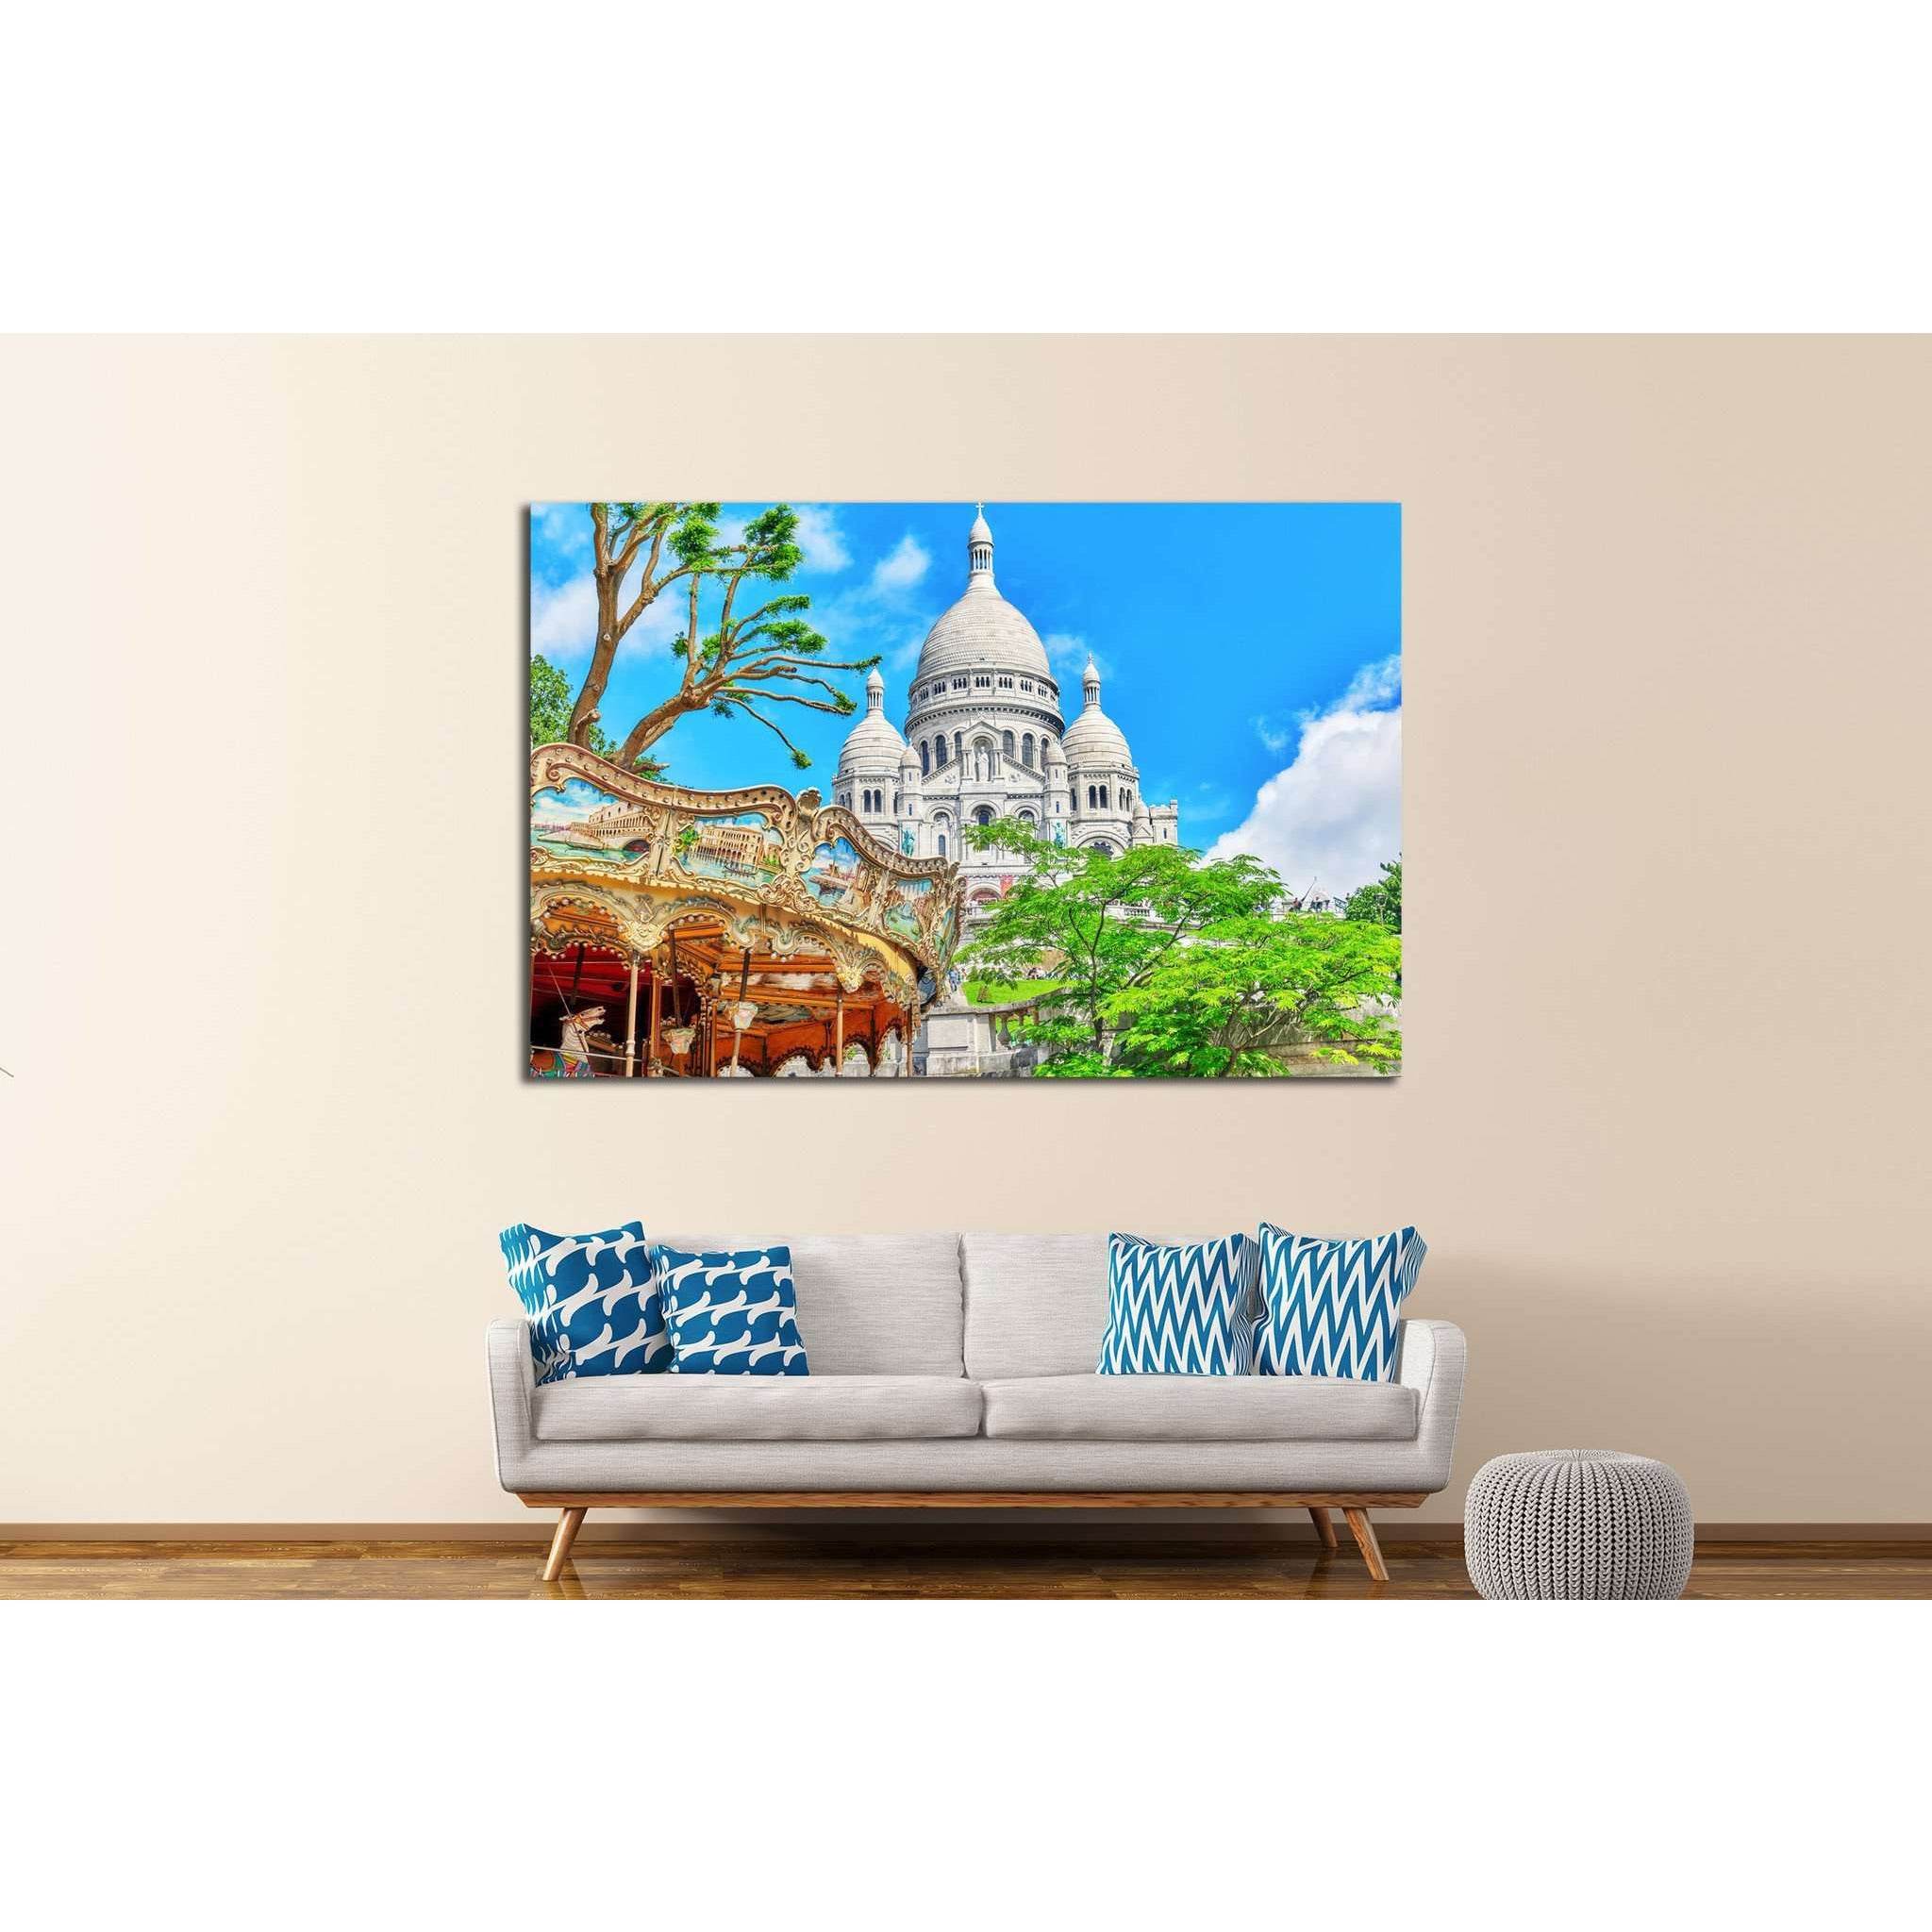 Sacre Coeur Cathedral on Montmartre Hill, Paris, France №1246 Ready to Hang Canvas Print